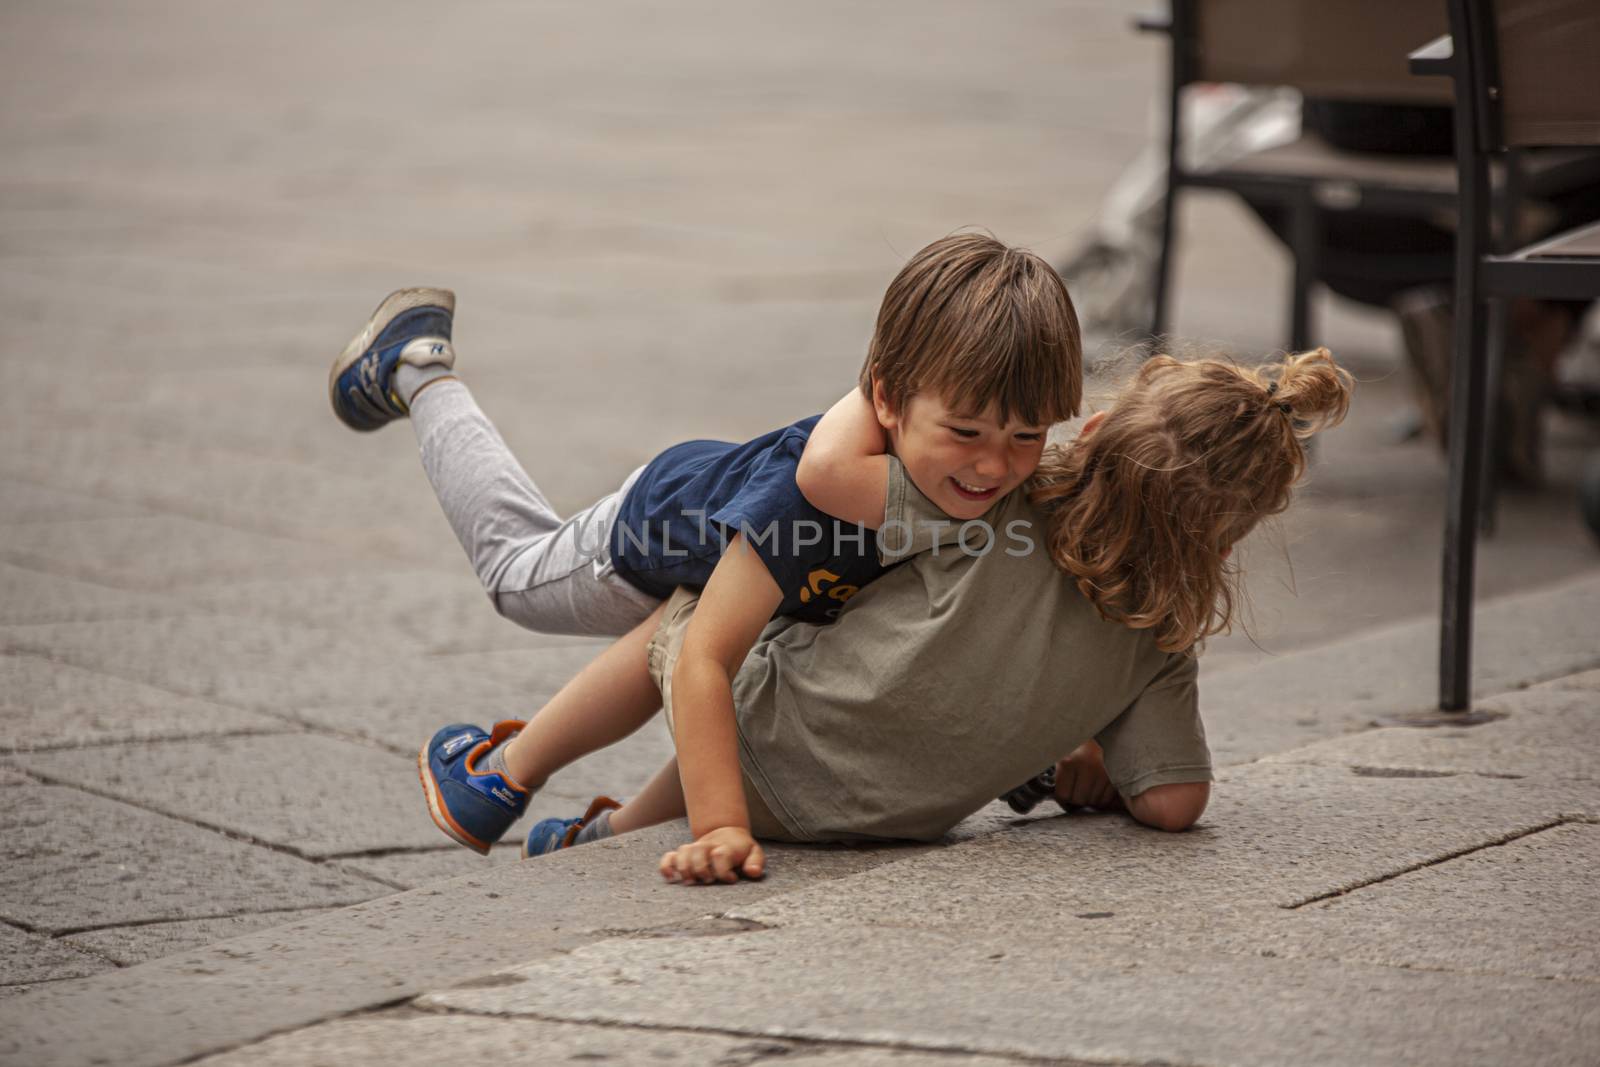 Children play on the street 2 by pippocarlot